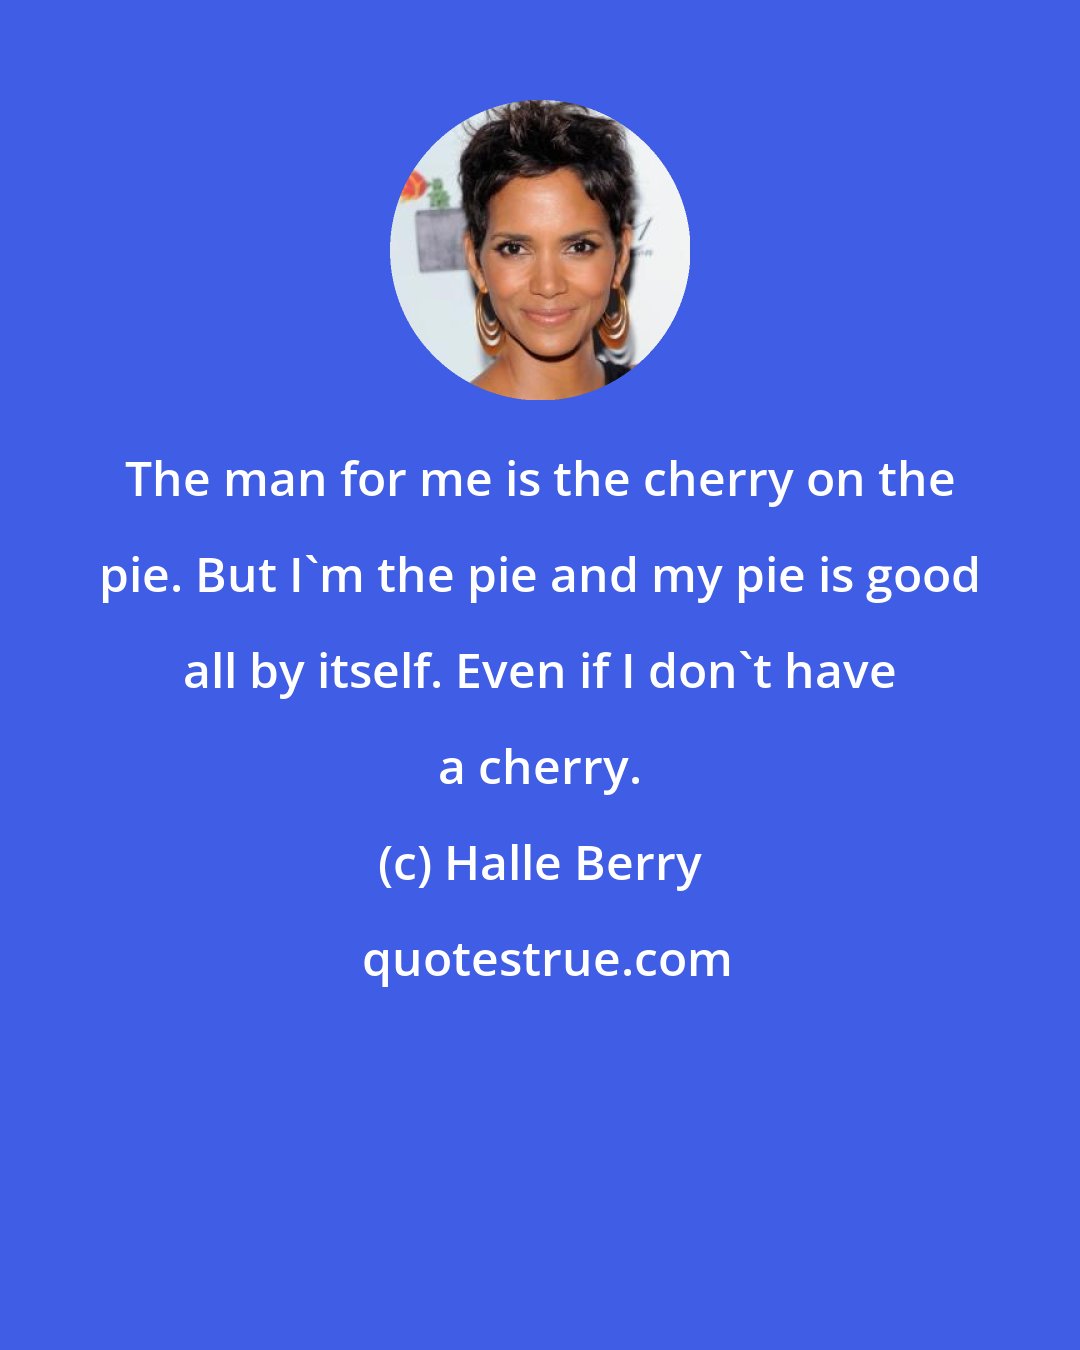 Halle Berry: The man for me is the cherry on the pie. But I'm the pie and my pie is good all by itself. Even if I don't have a cherry.